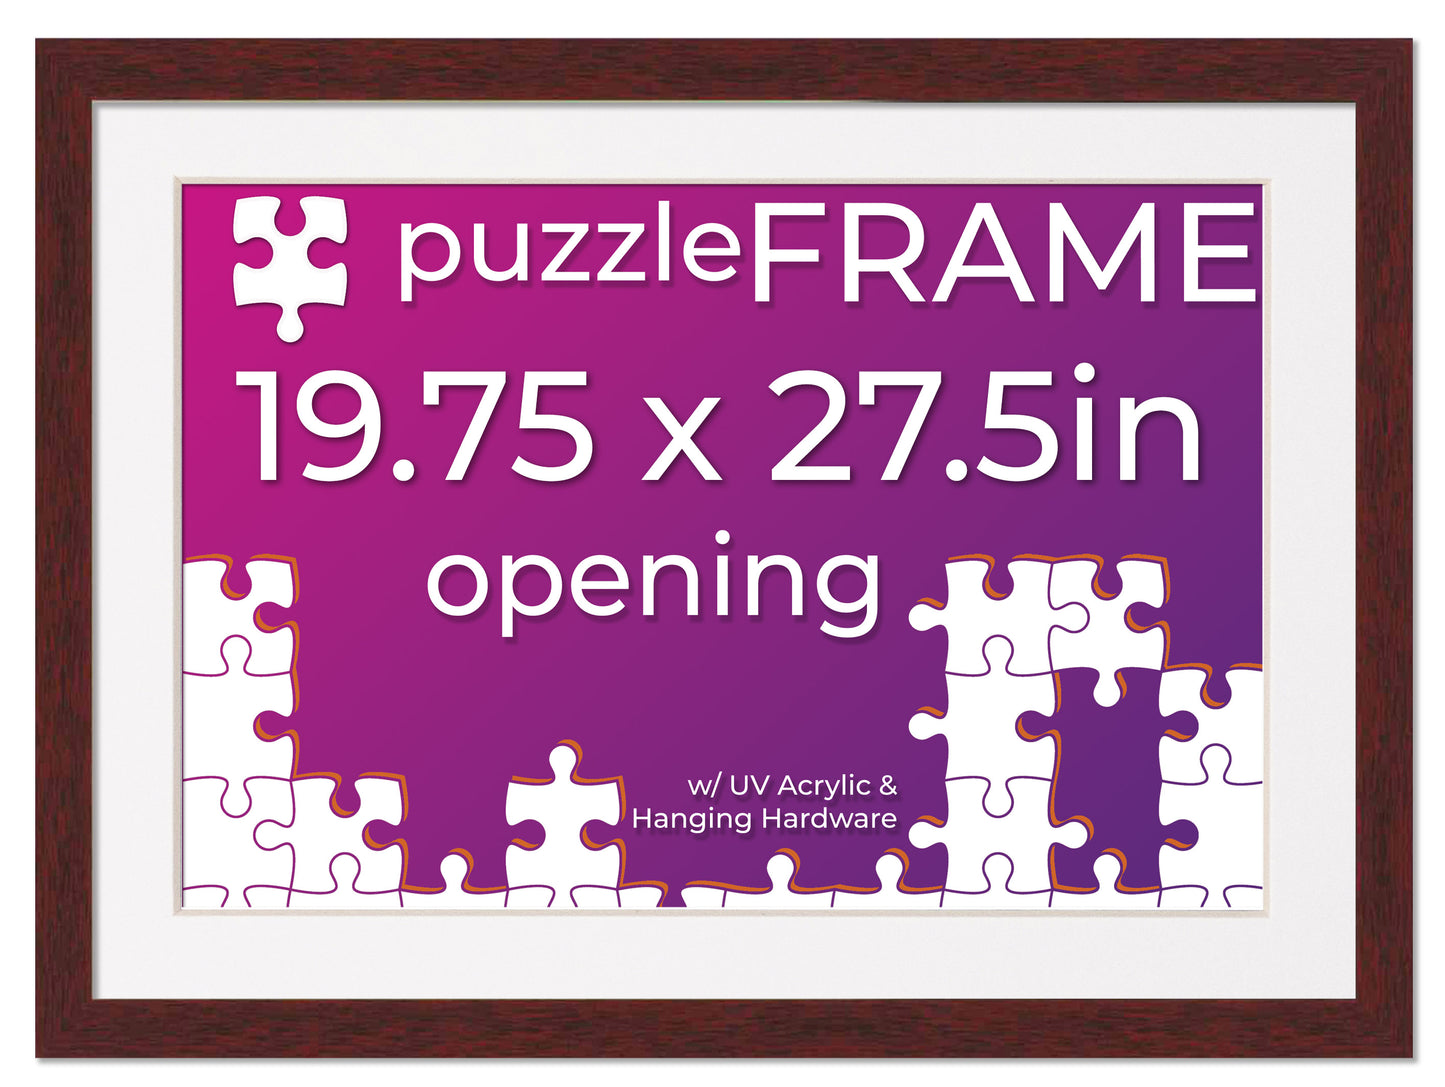 Brown Frame With White Mat for Jigsaw Puzzles